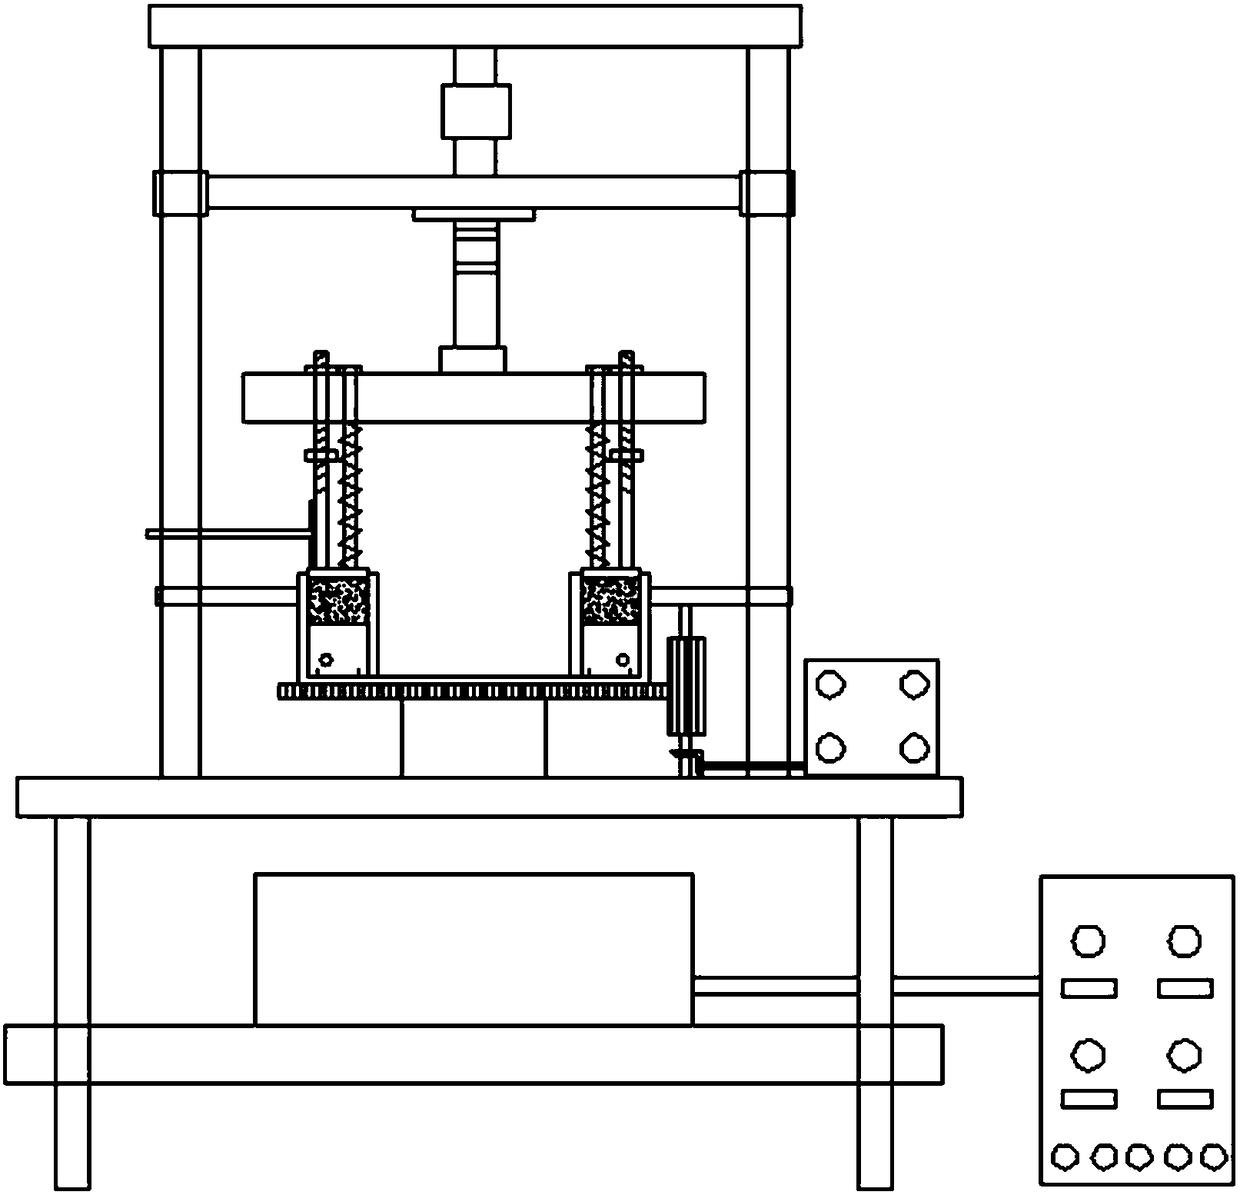 Ring shear apparatus considering constant stiffness, constant volume and constant stress,